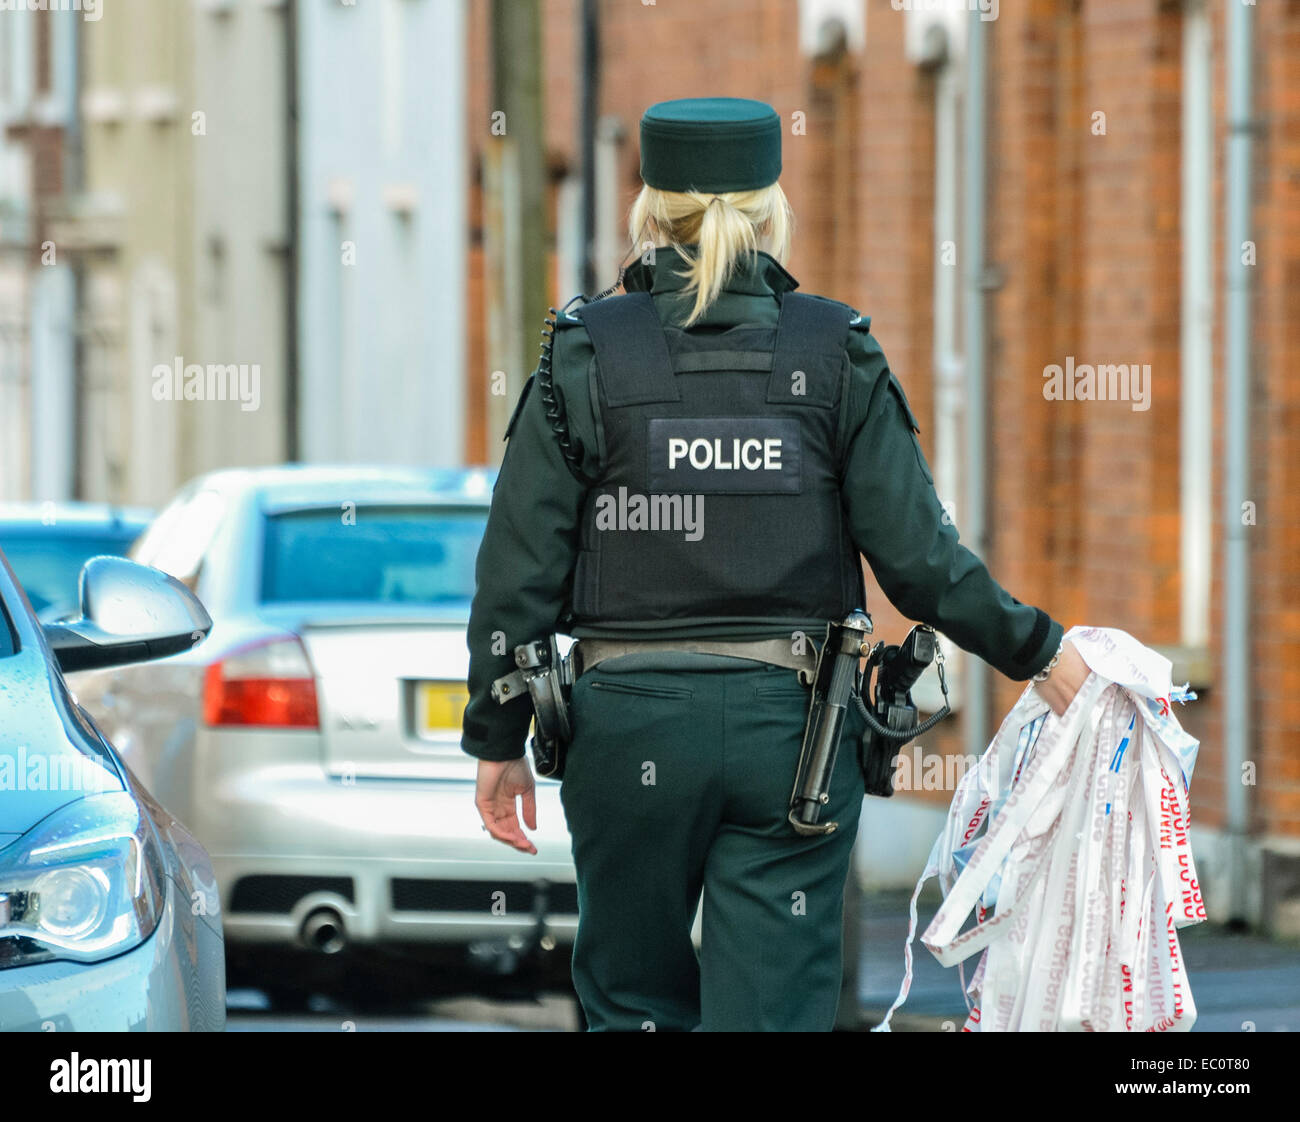 Belfast, Northern Ireland. 7 Dec 2014 - A police officer removes cordon tape outside the house where a domestic incident resulted in a 21 year old man being fatally stabbed late last night.  Two men (21 and 25) and a woman (25) have been arrested. Stock Photo